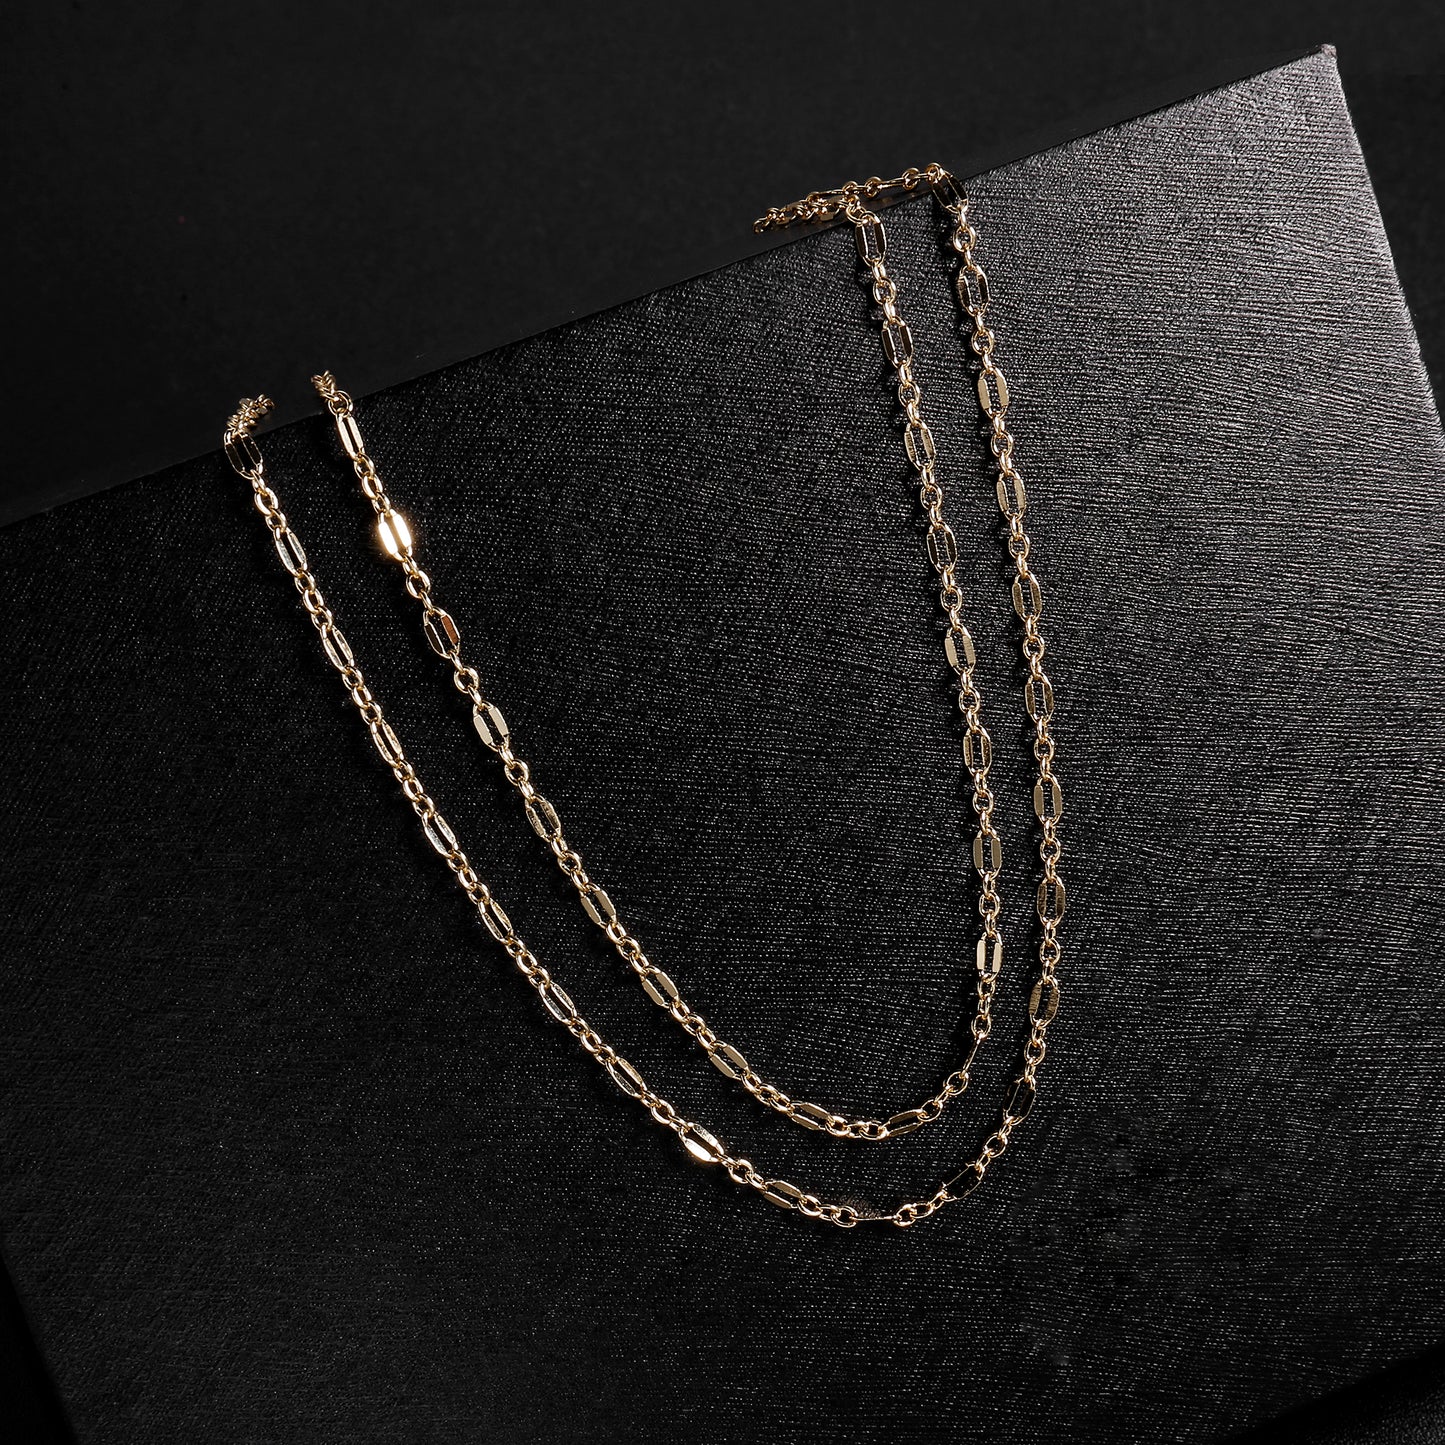 TASISO 14K Gold Plated Layered Lip Chain Choker Necklace